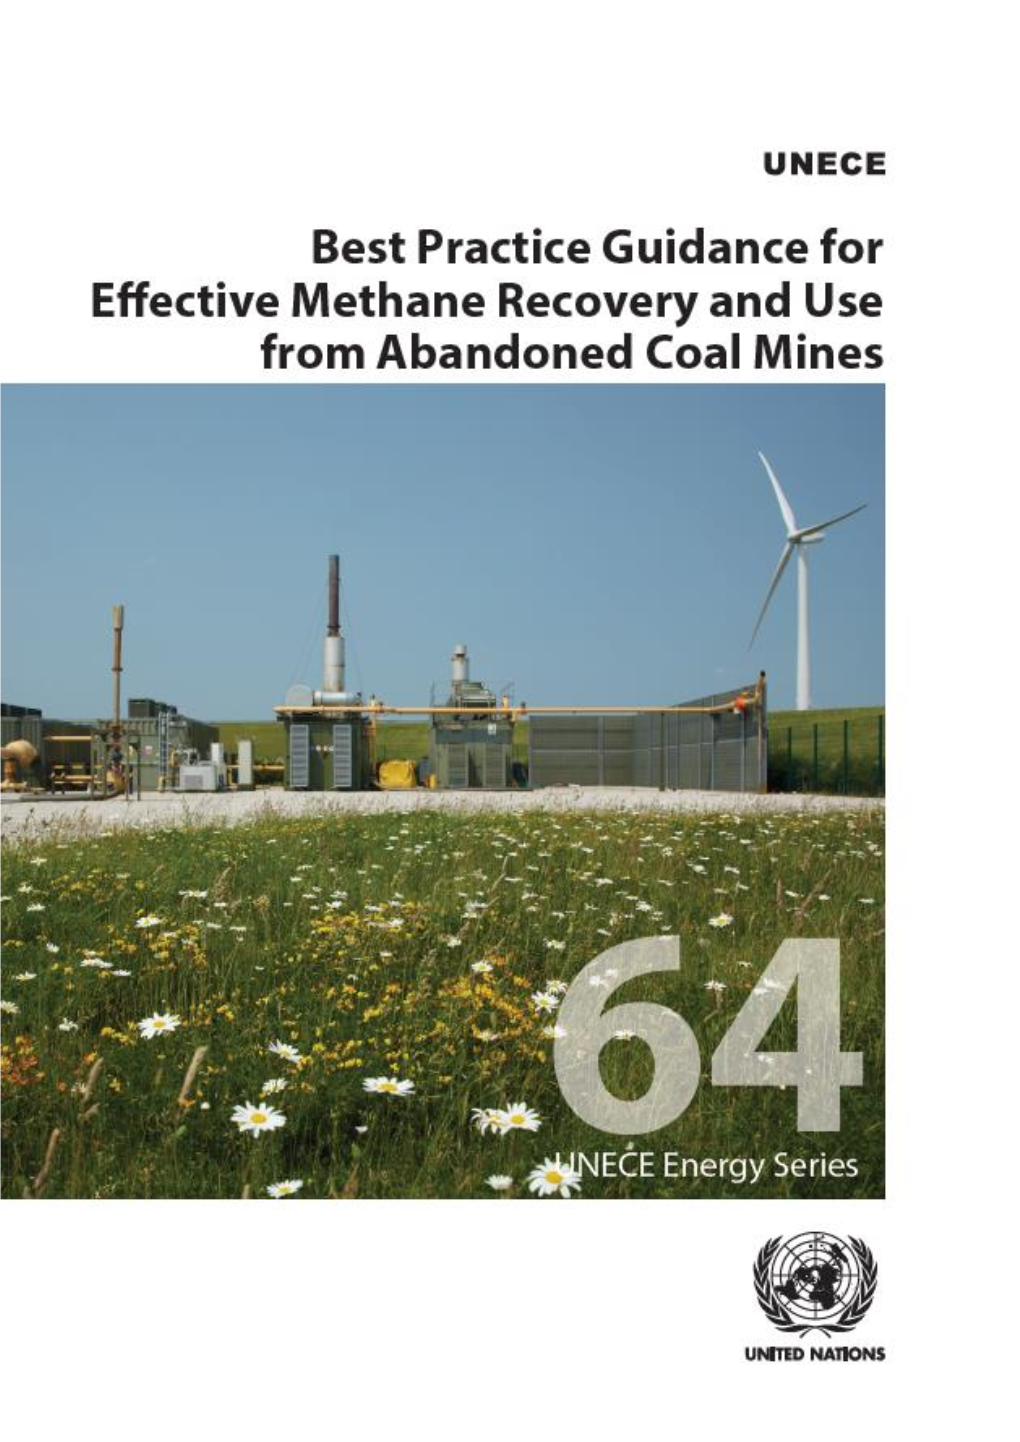 Best Practice Guidance for Effective Methane Recovery and Use from Abandoned Coal Mines